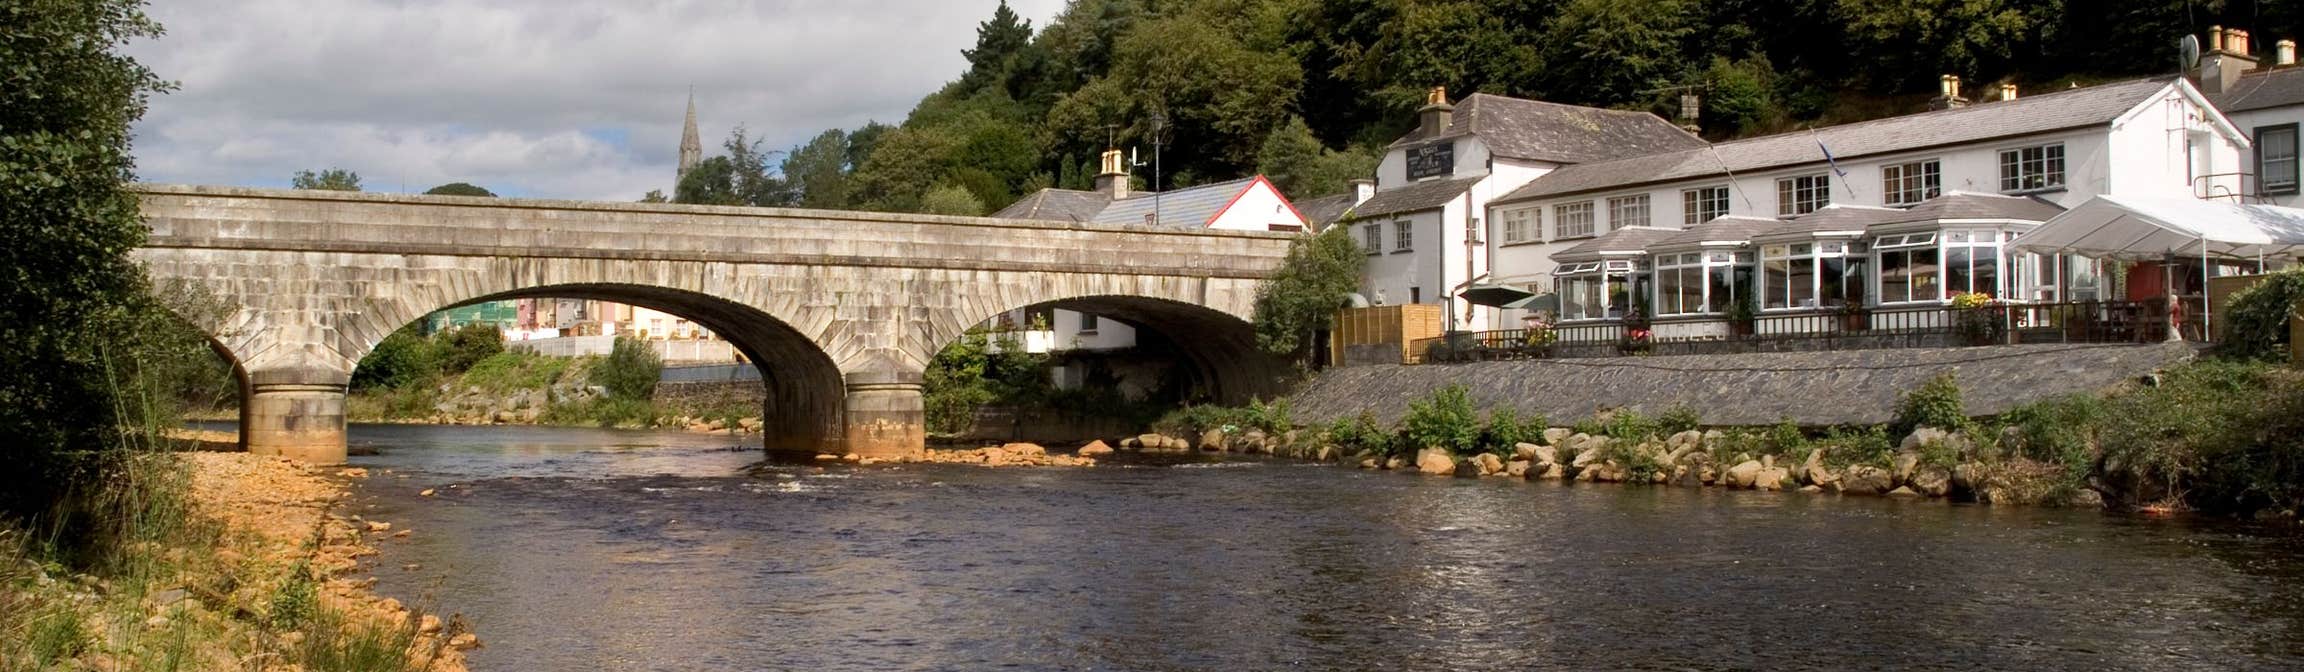 Image of a bridge in Avoca in County Wicklow